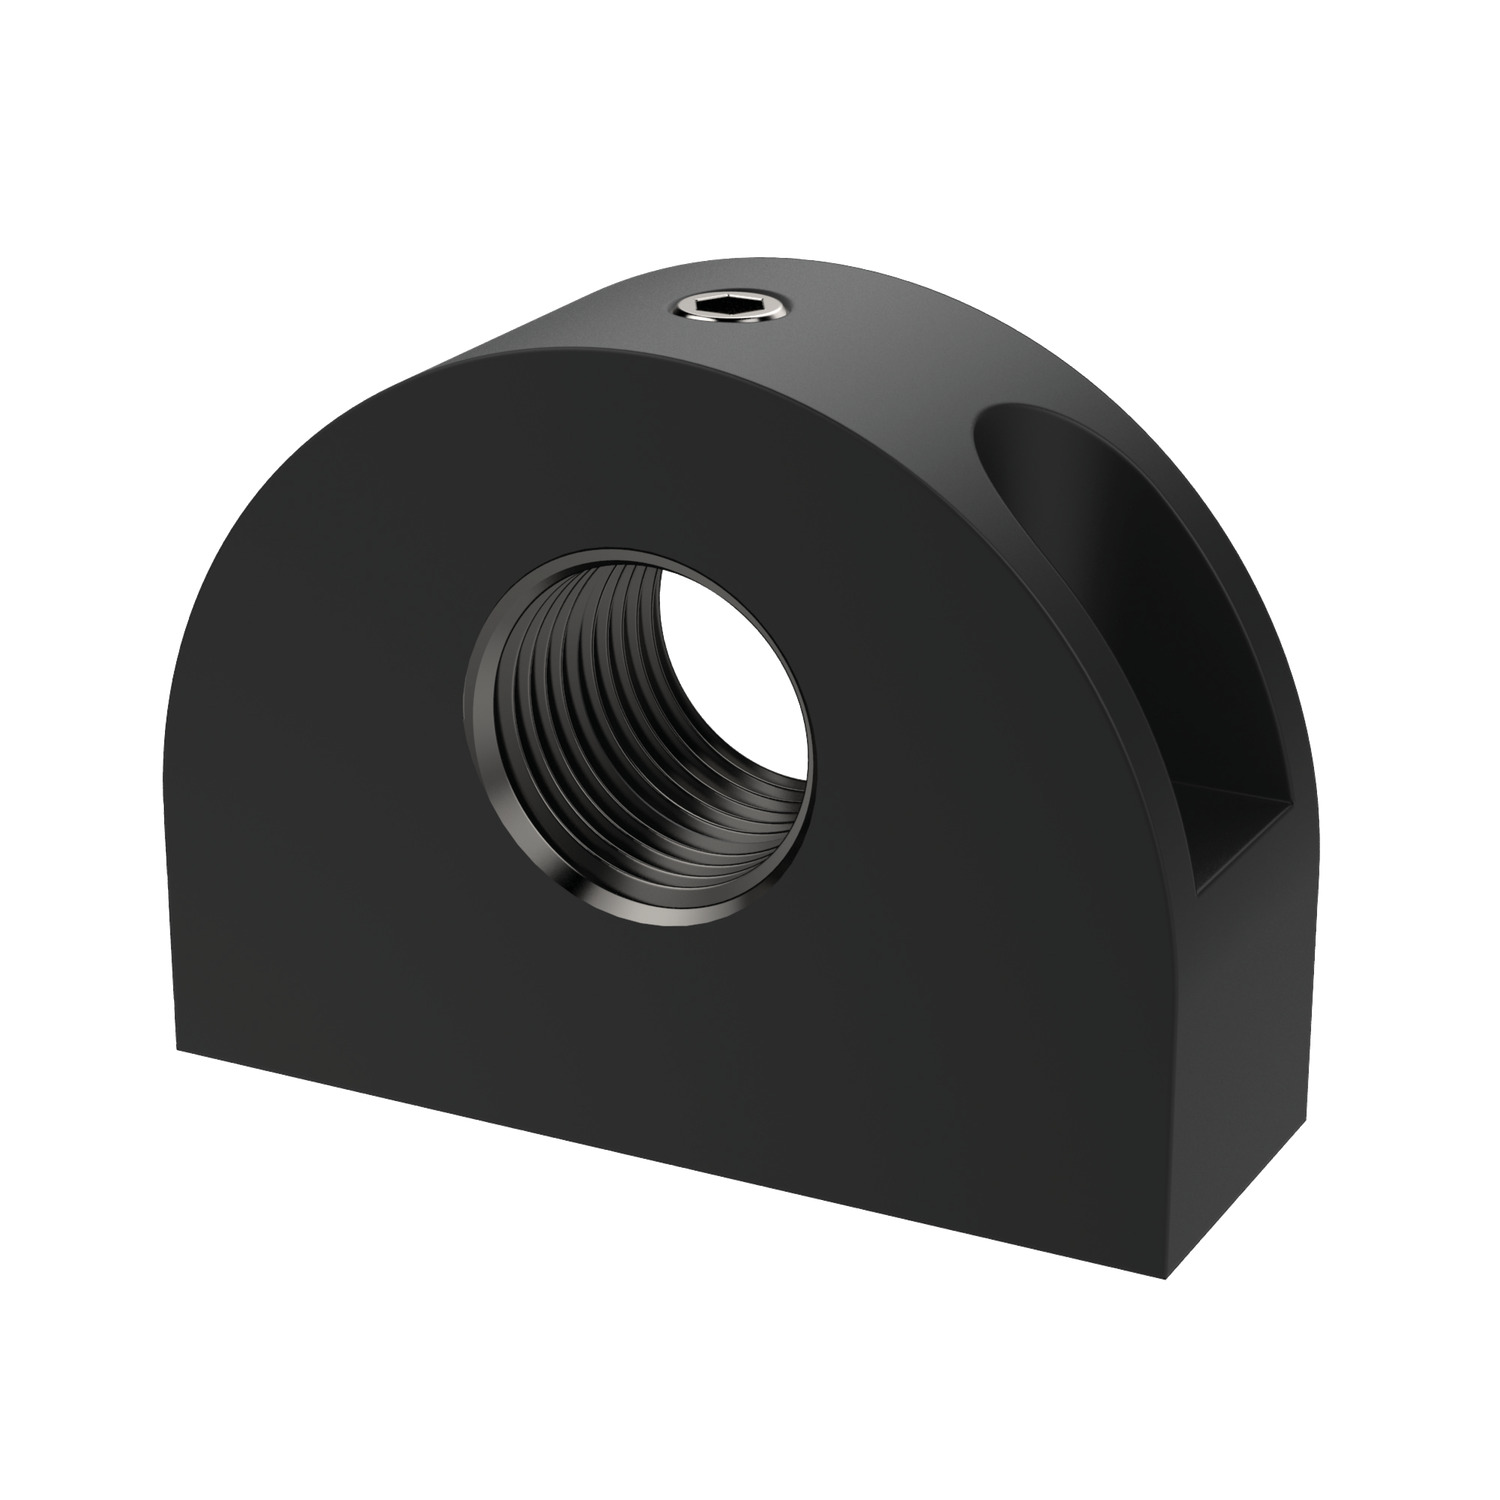 Mounting Blocks Mounting blocks for index plungers, fine thread. Available in steel or stainless steel, black plastic coated. Mounting blocks provide assembly support for mounting of index plungers